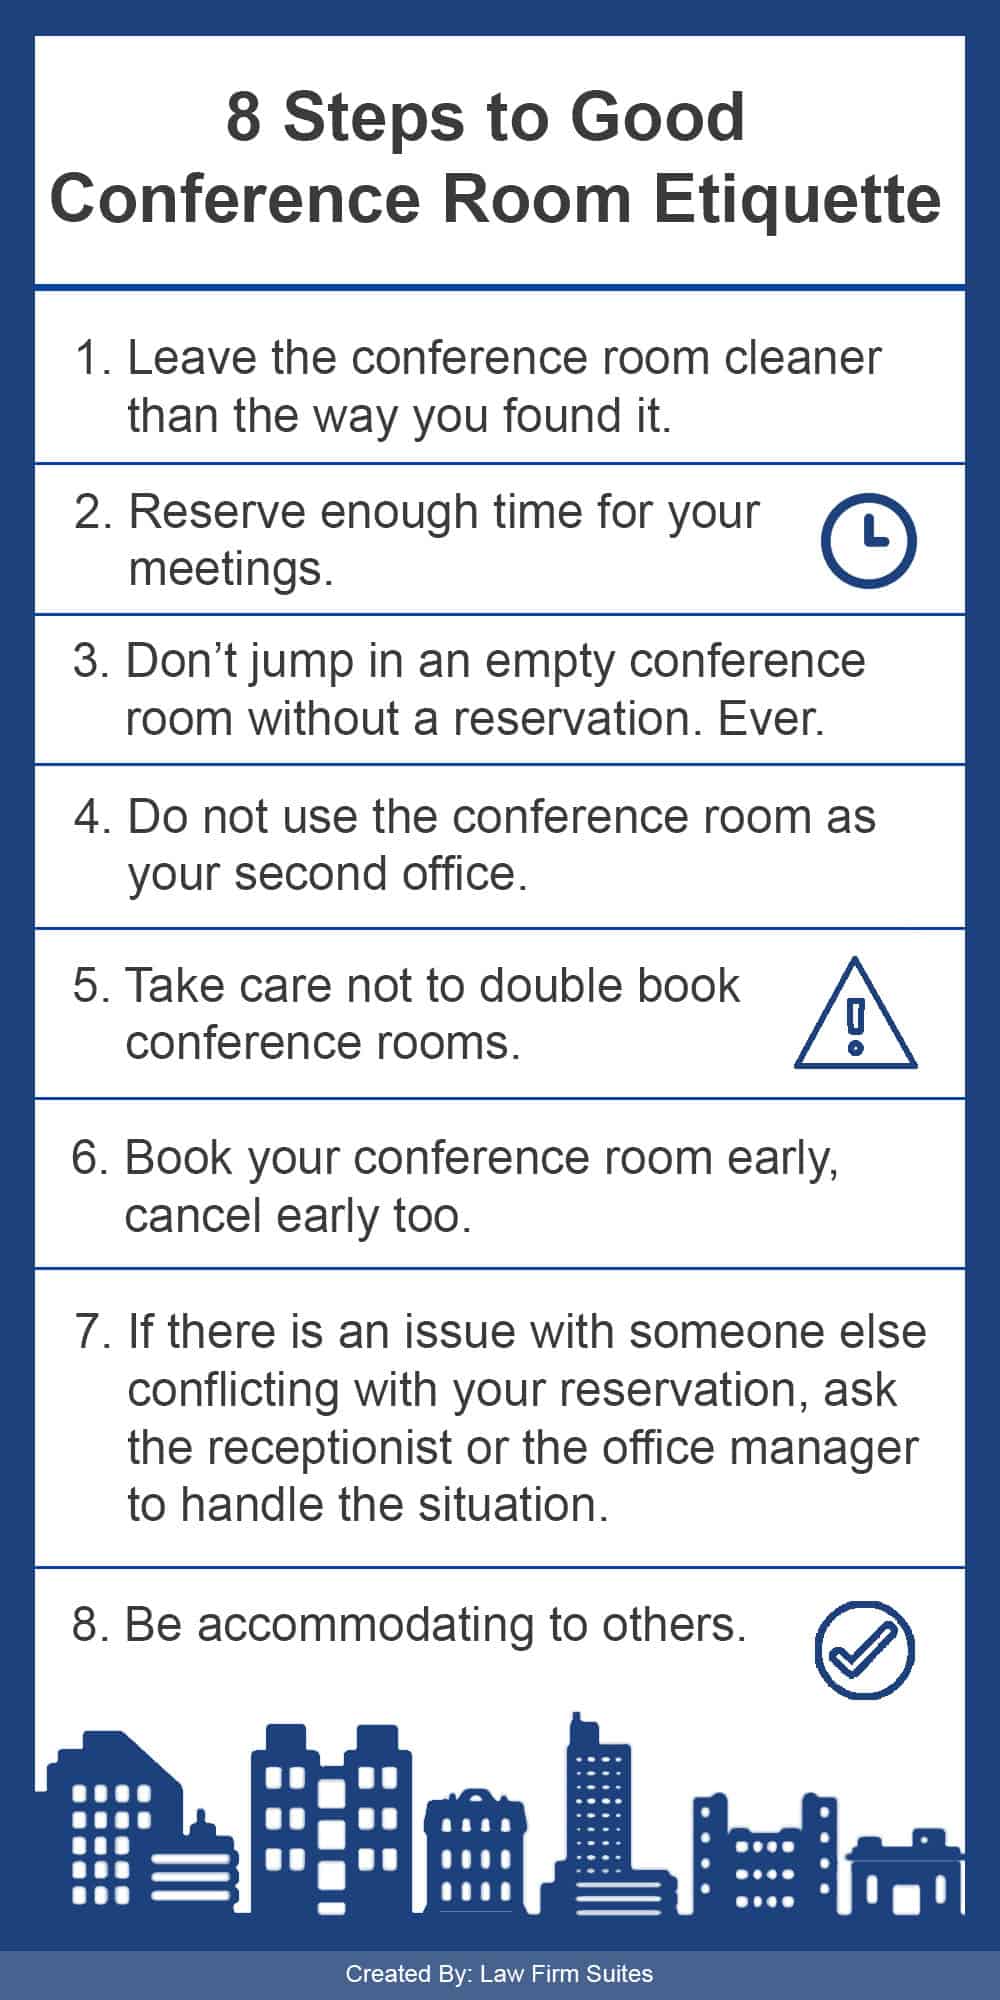 conference room etiquette infographic